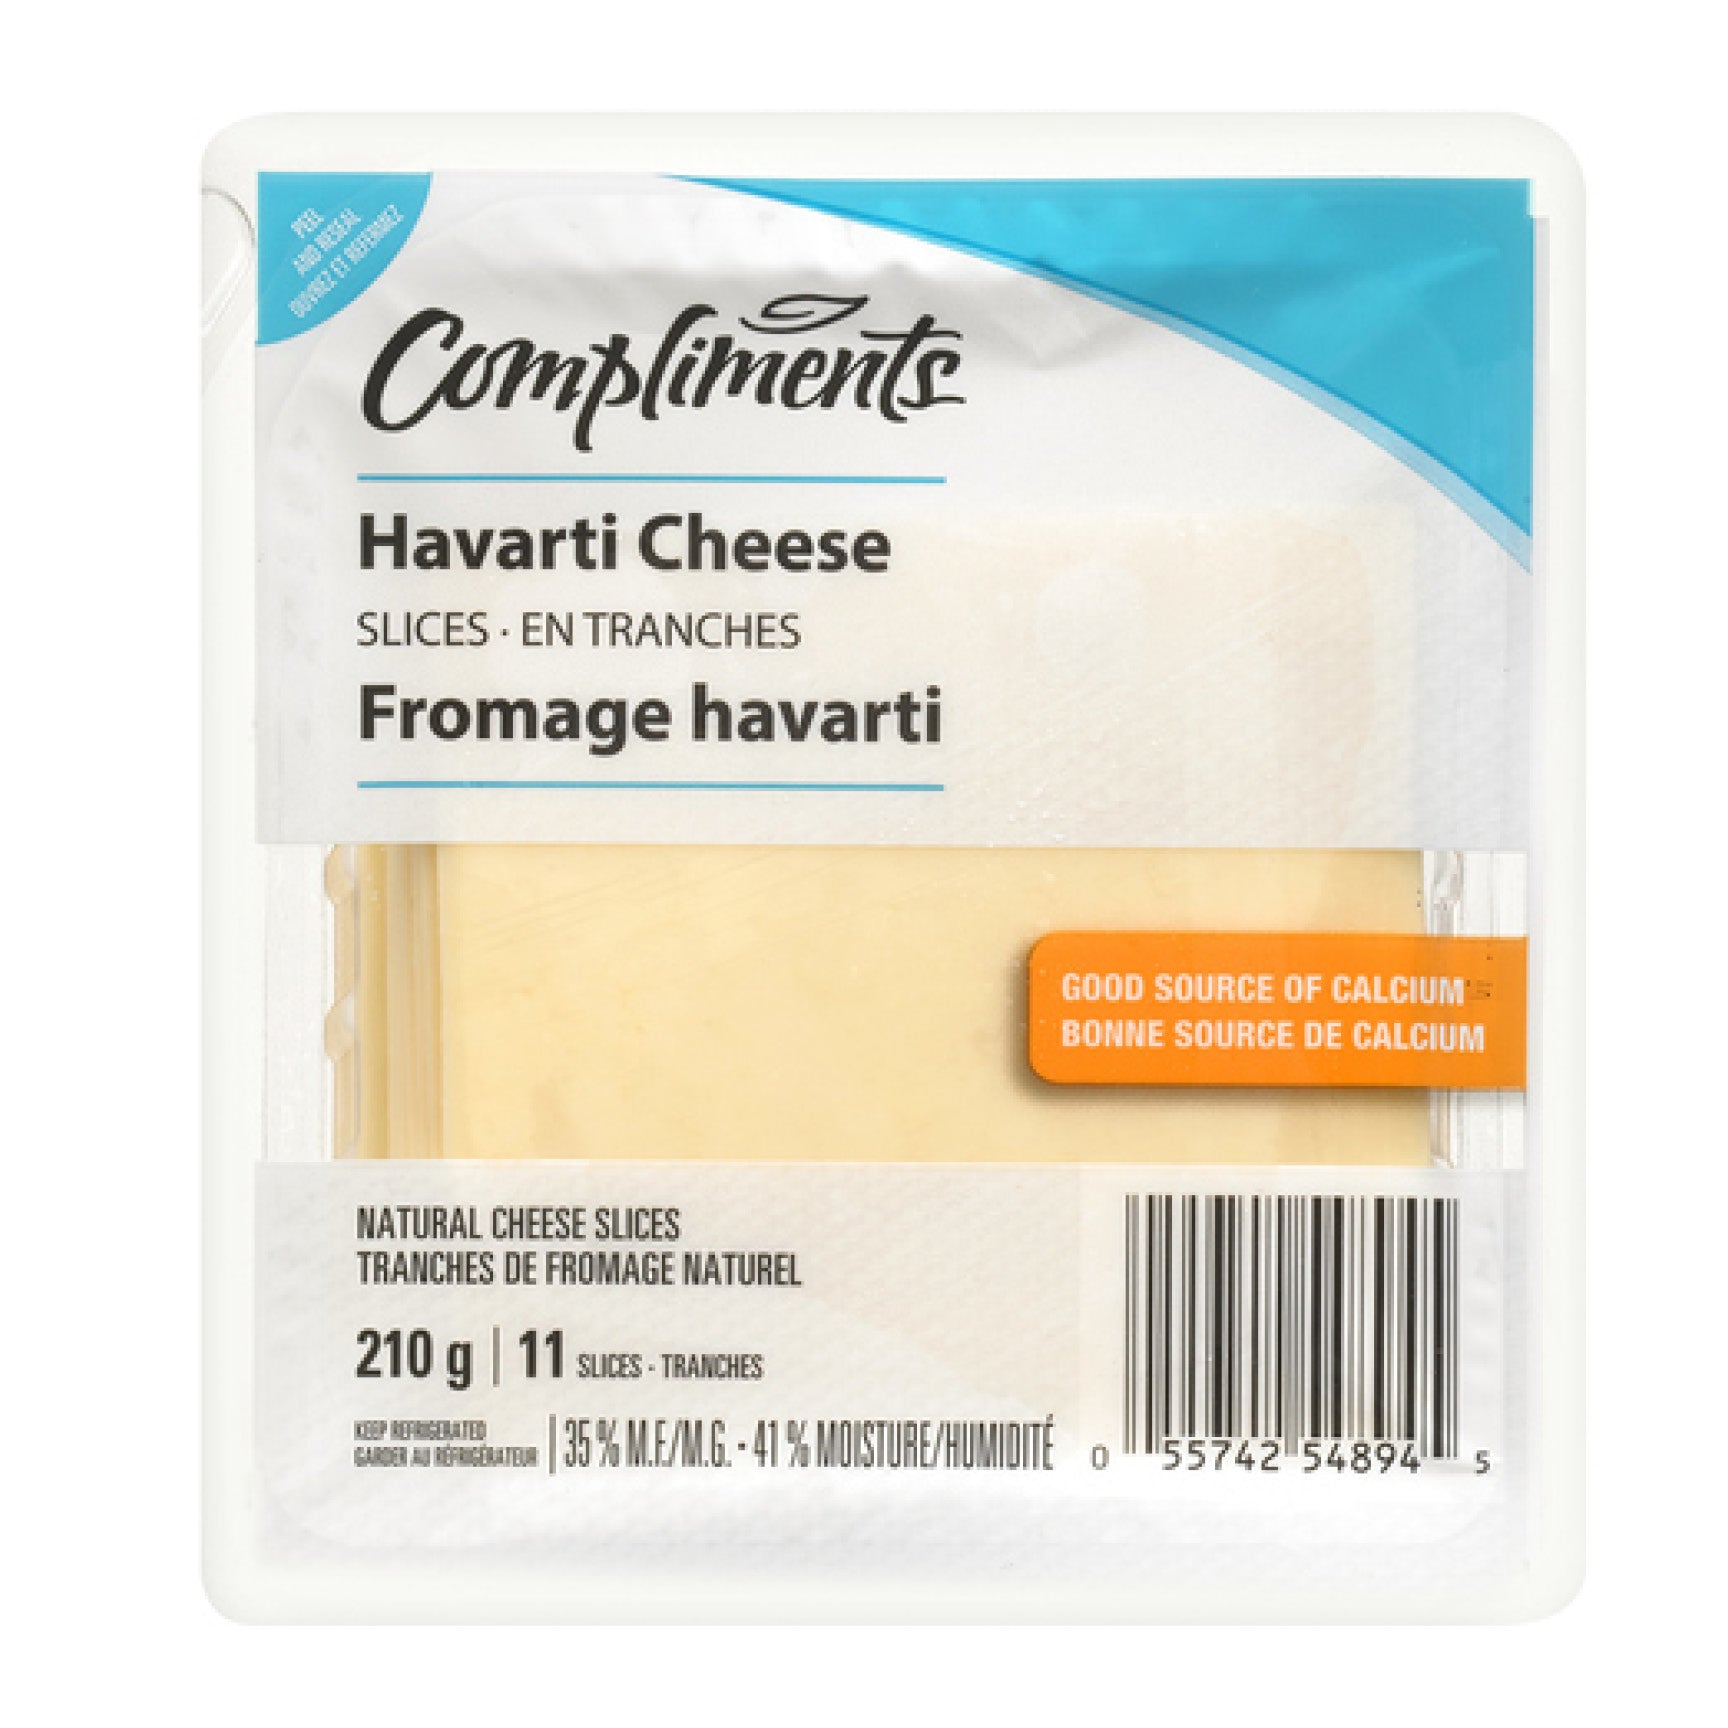 Compliments Cheese, Havarti Slices, 210g